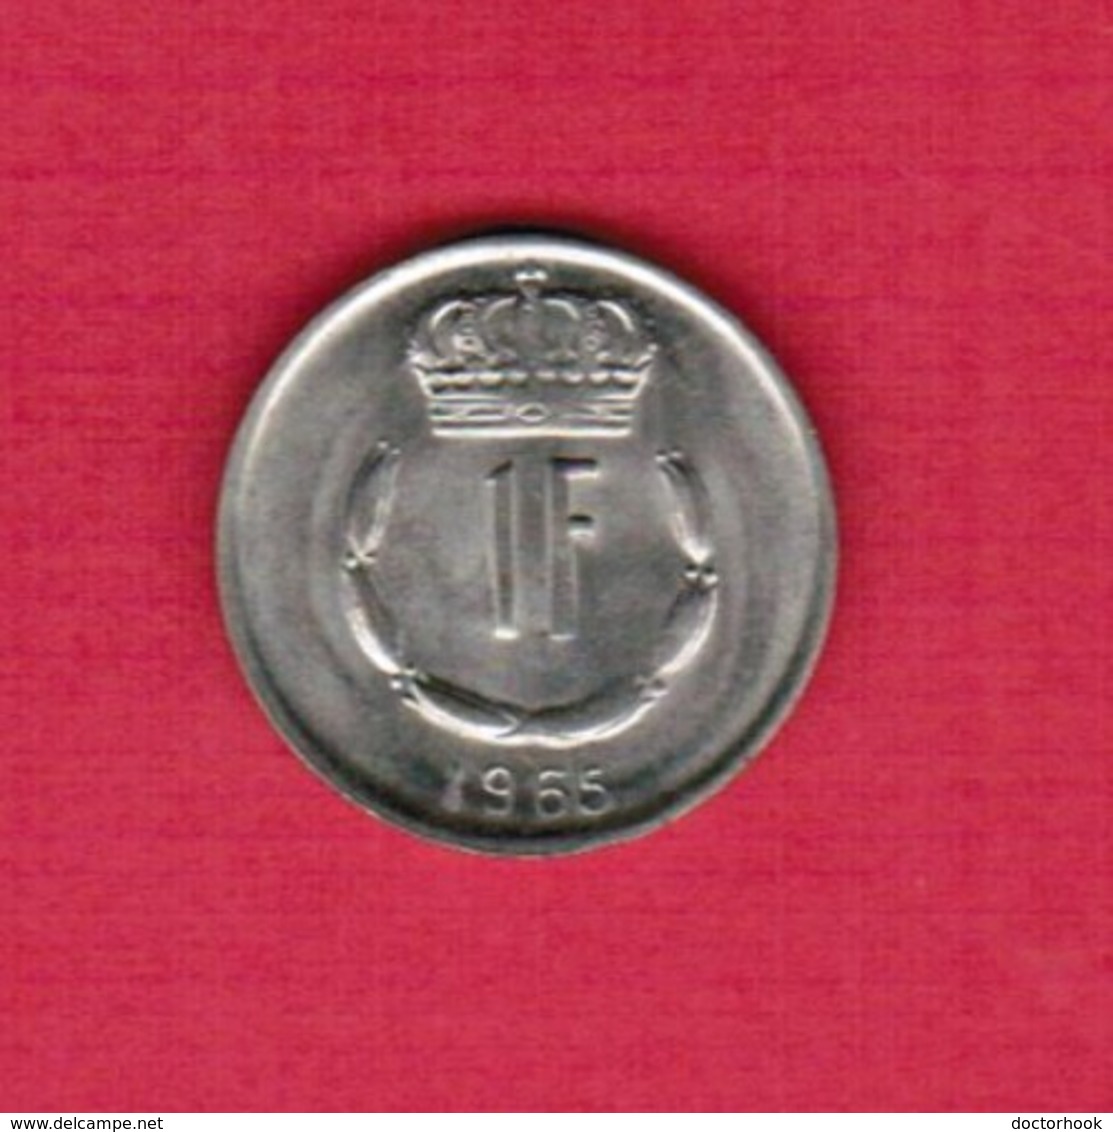 LUXEMBOURG   1 FRANC 1965  (KM # 35) #5185 - Luxembourg